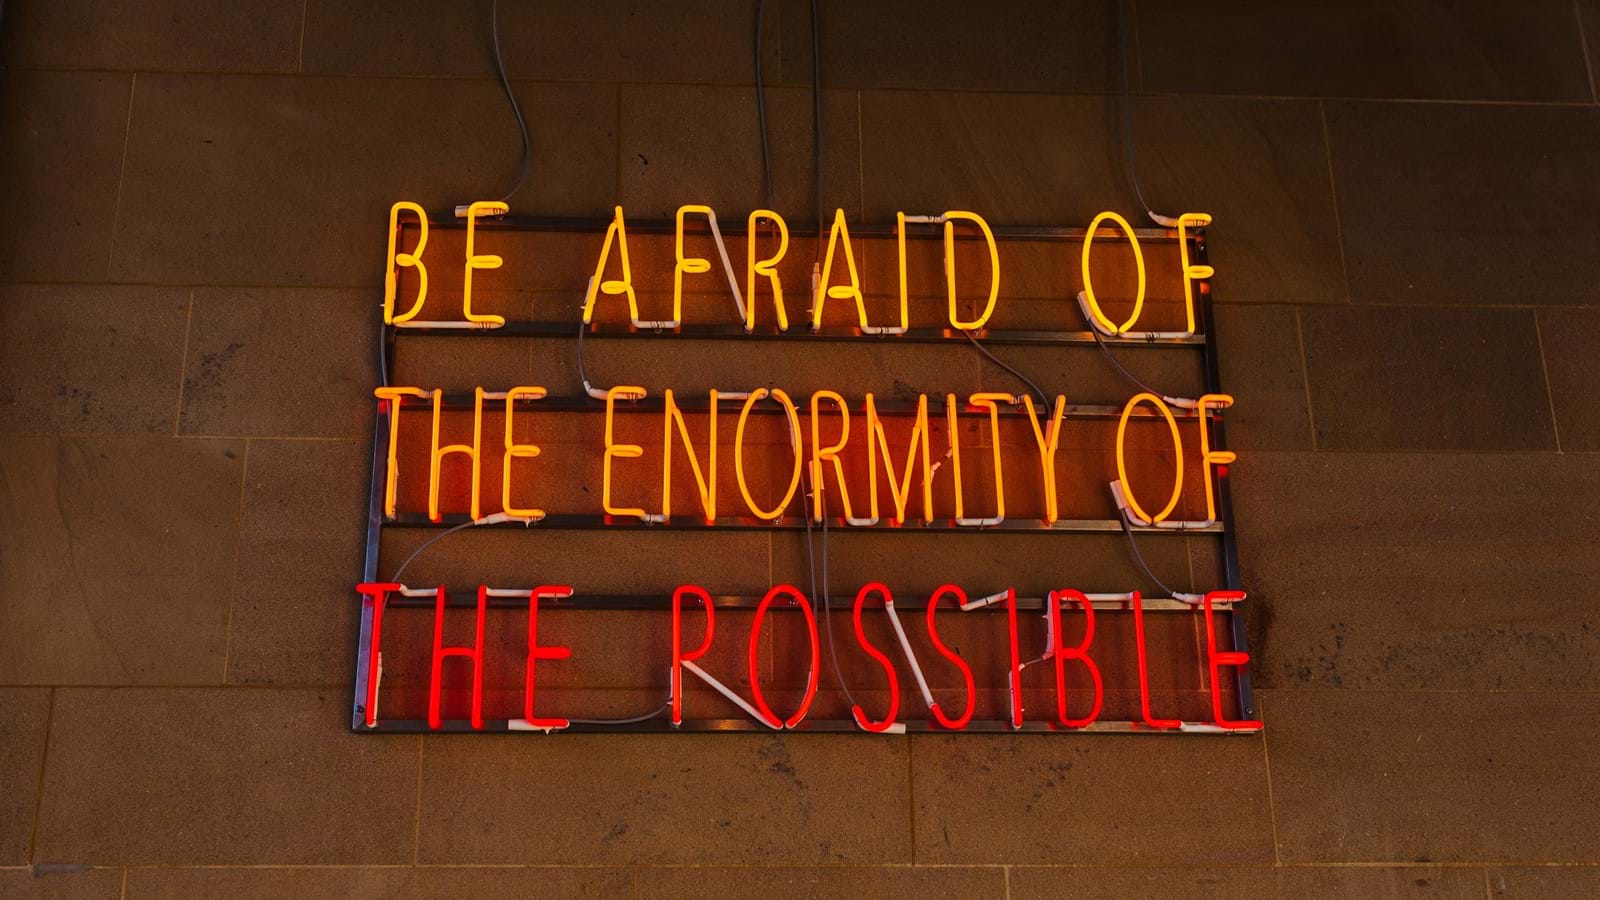 'Be afraid of the enormity of the possible' sign